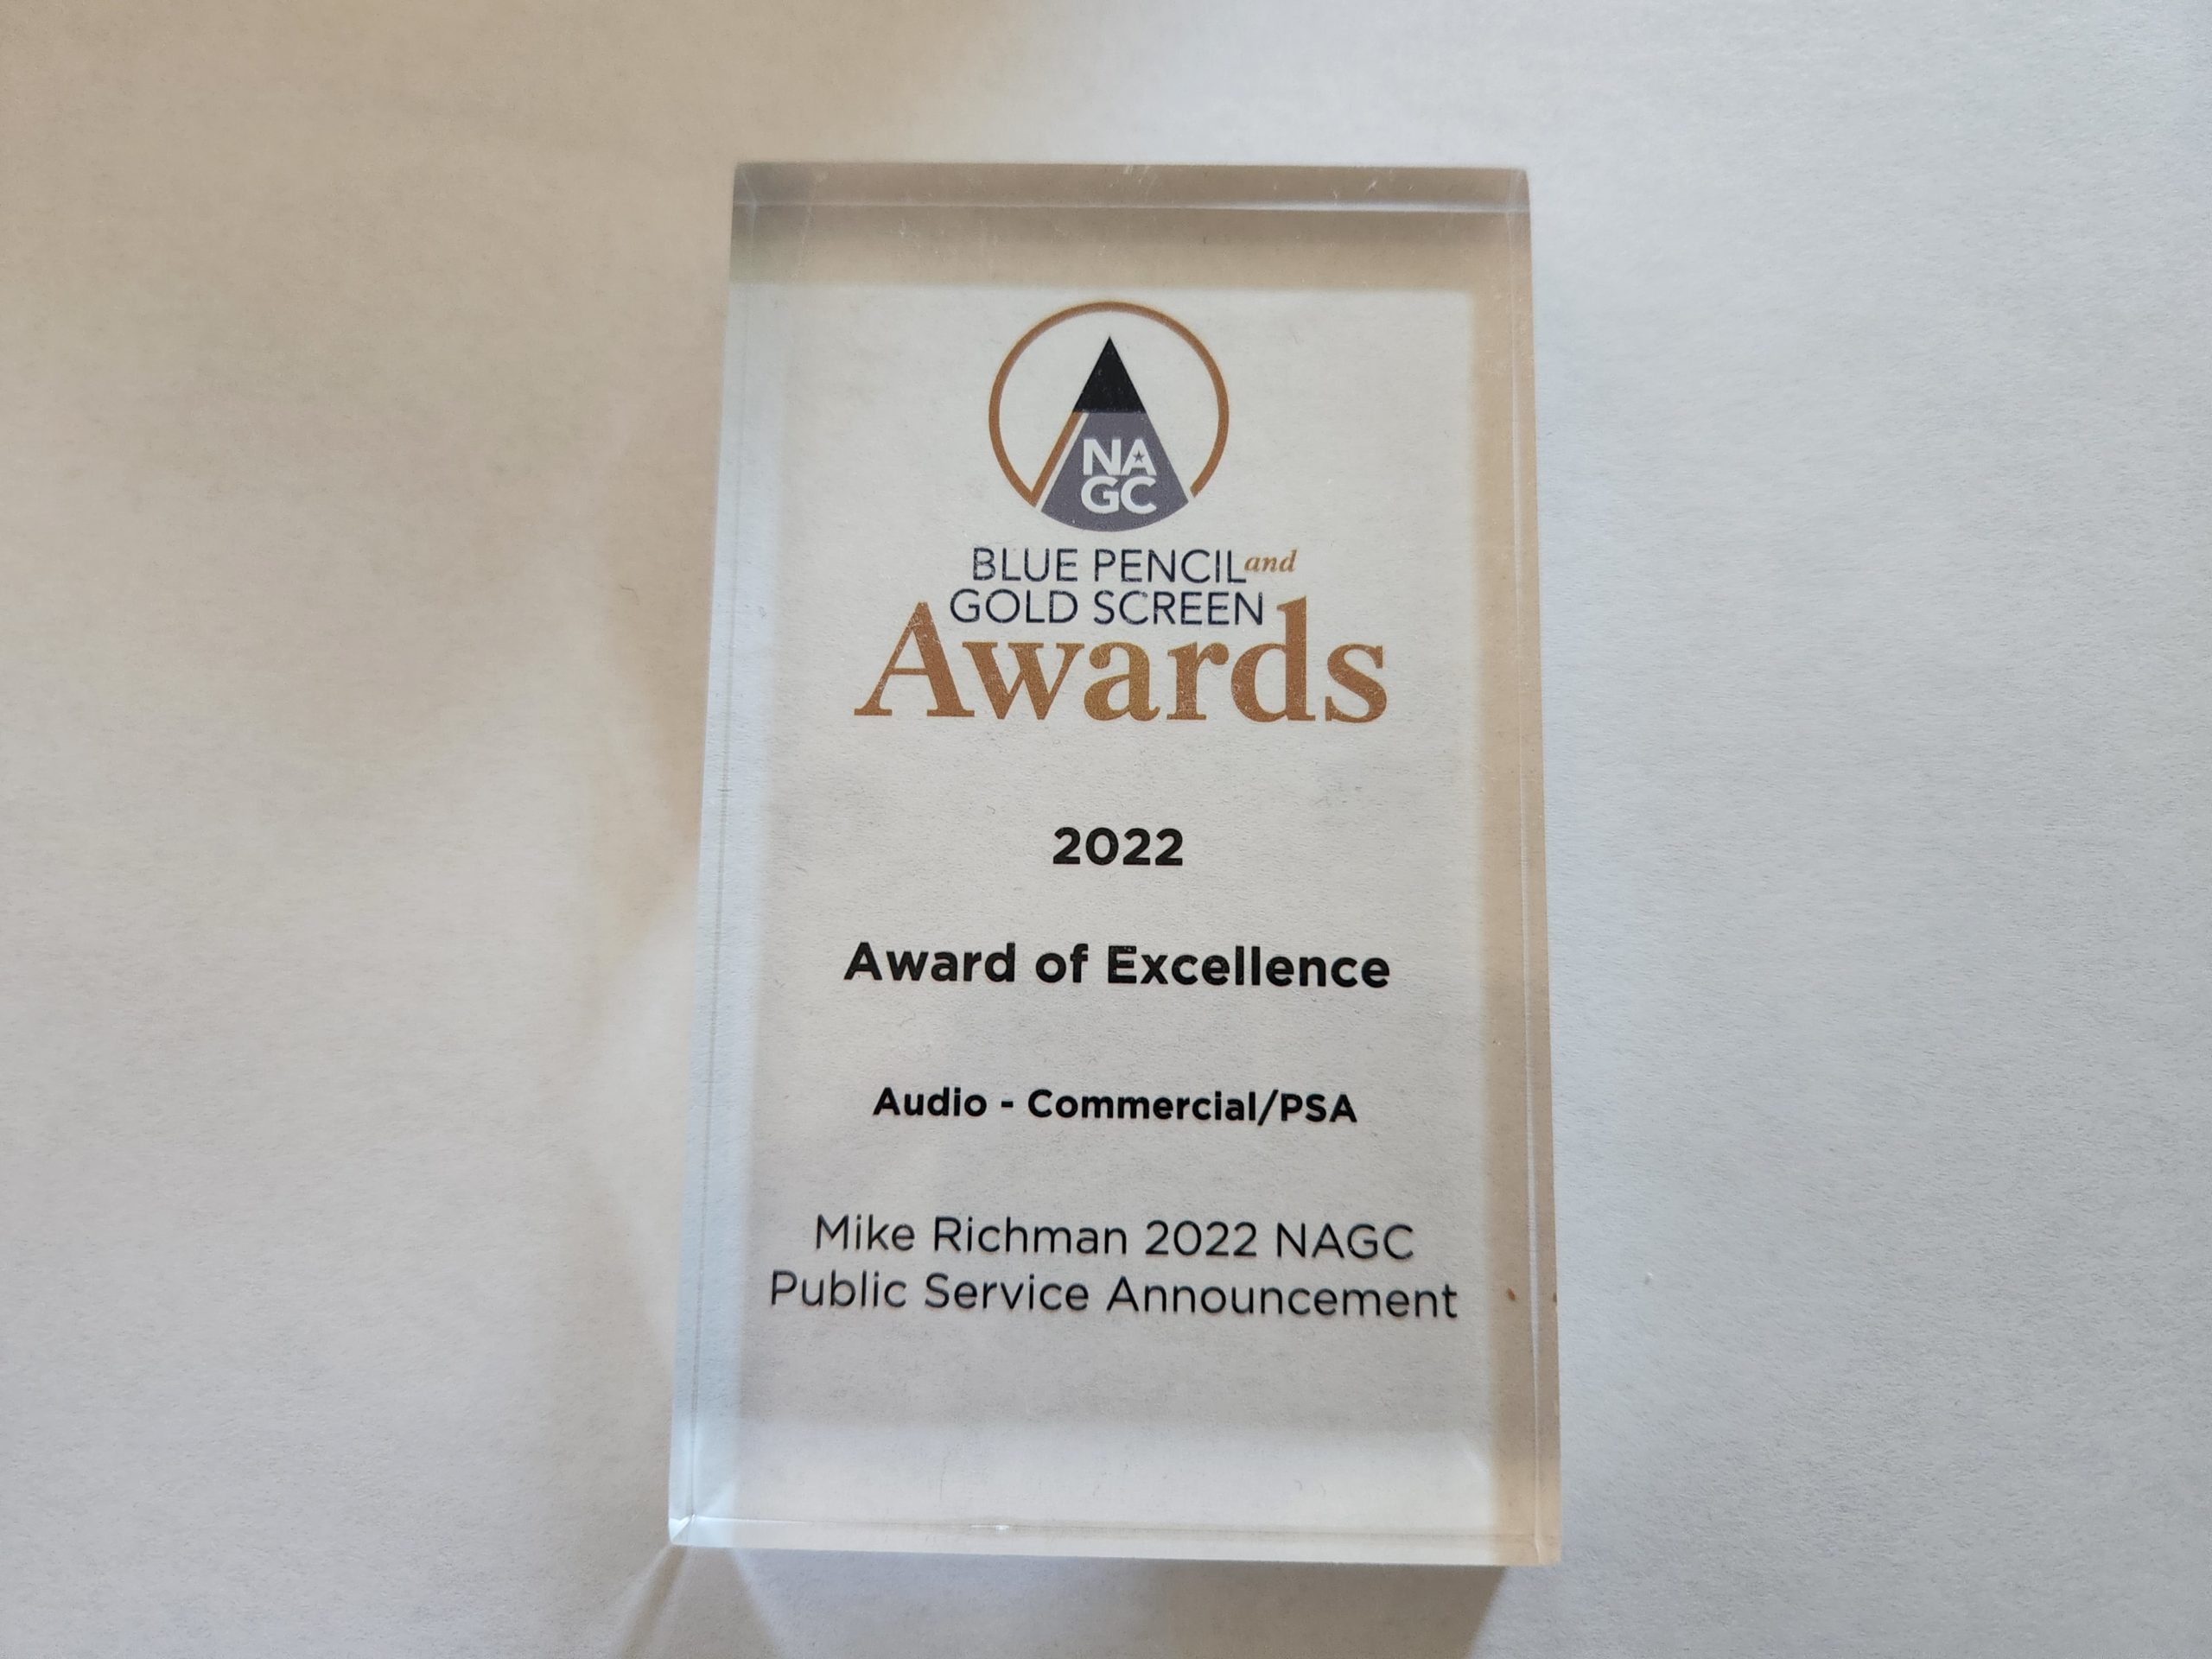 In 2022, Mike Richman received a National Association of Government Communications (NAGC) award for voicing a public service announcement (PSA) on VA’s Million Veteran Program, a national research program looking at how genes, lifestyle, military experiences and exposures affect health and wellness in Veterans.